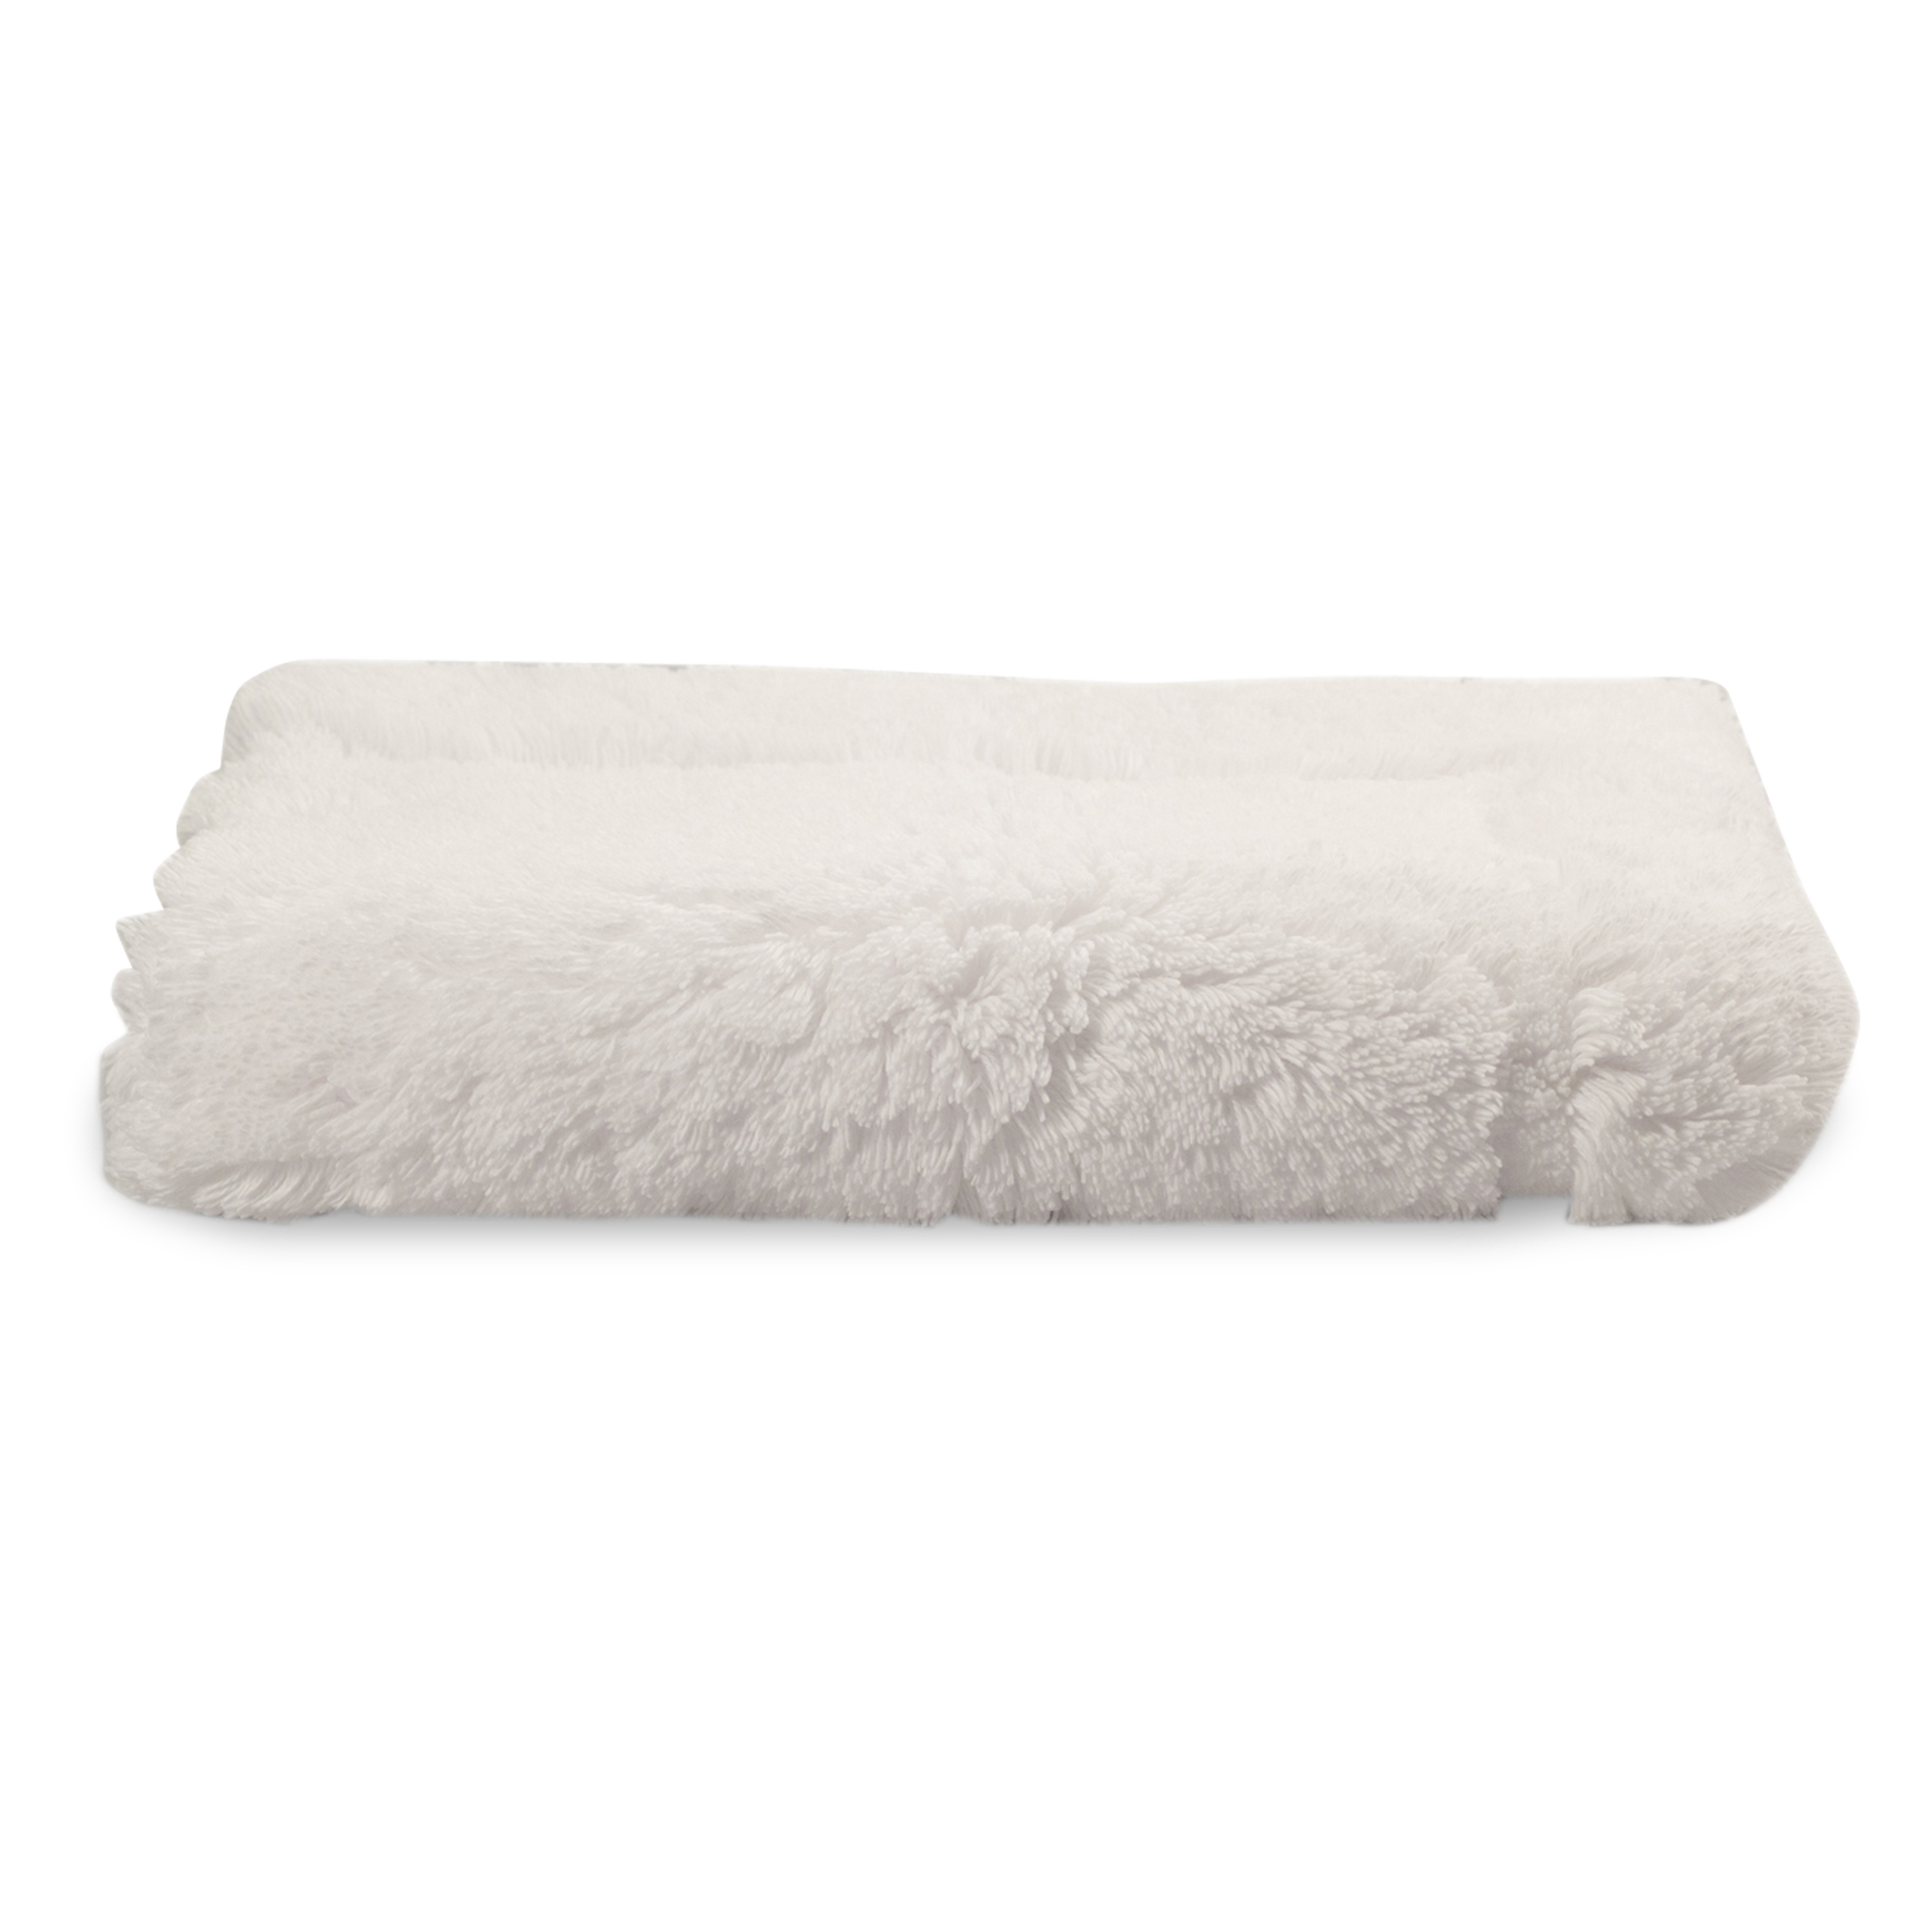 Made from 100% Egyptian combed cotton, the Must bath mat provides a soft and sumptuous layer underfoot.